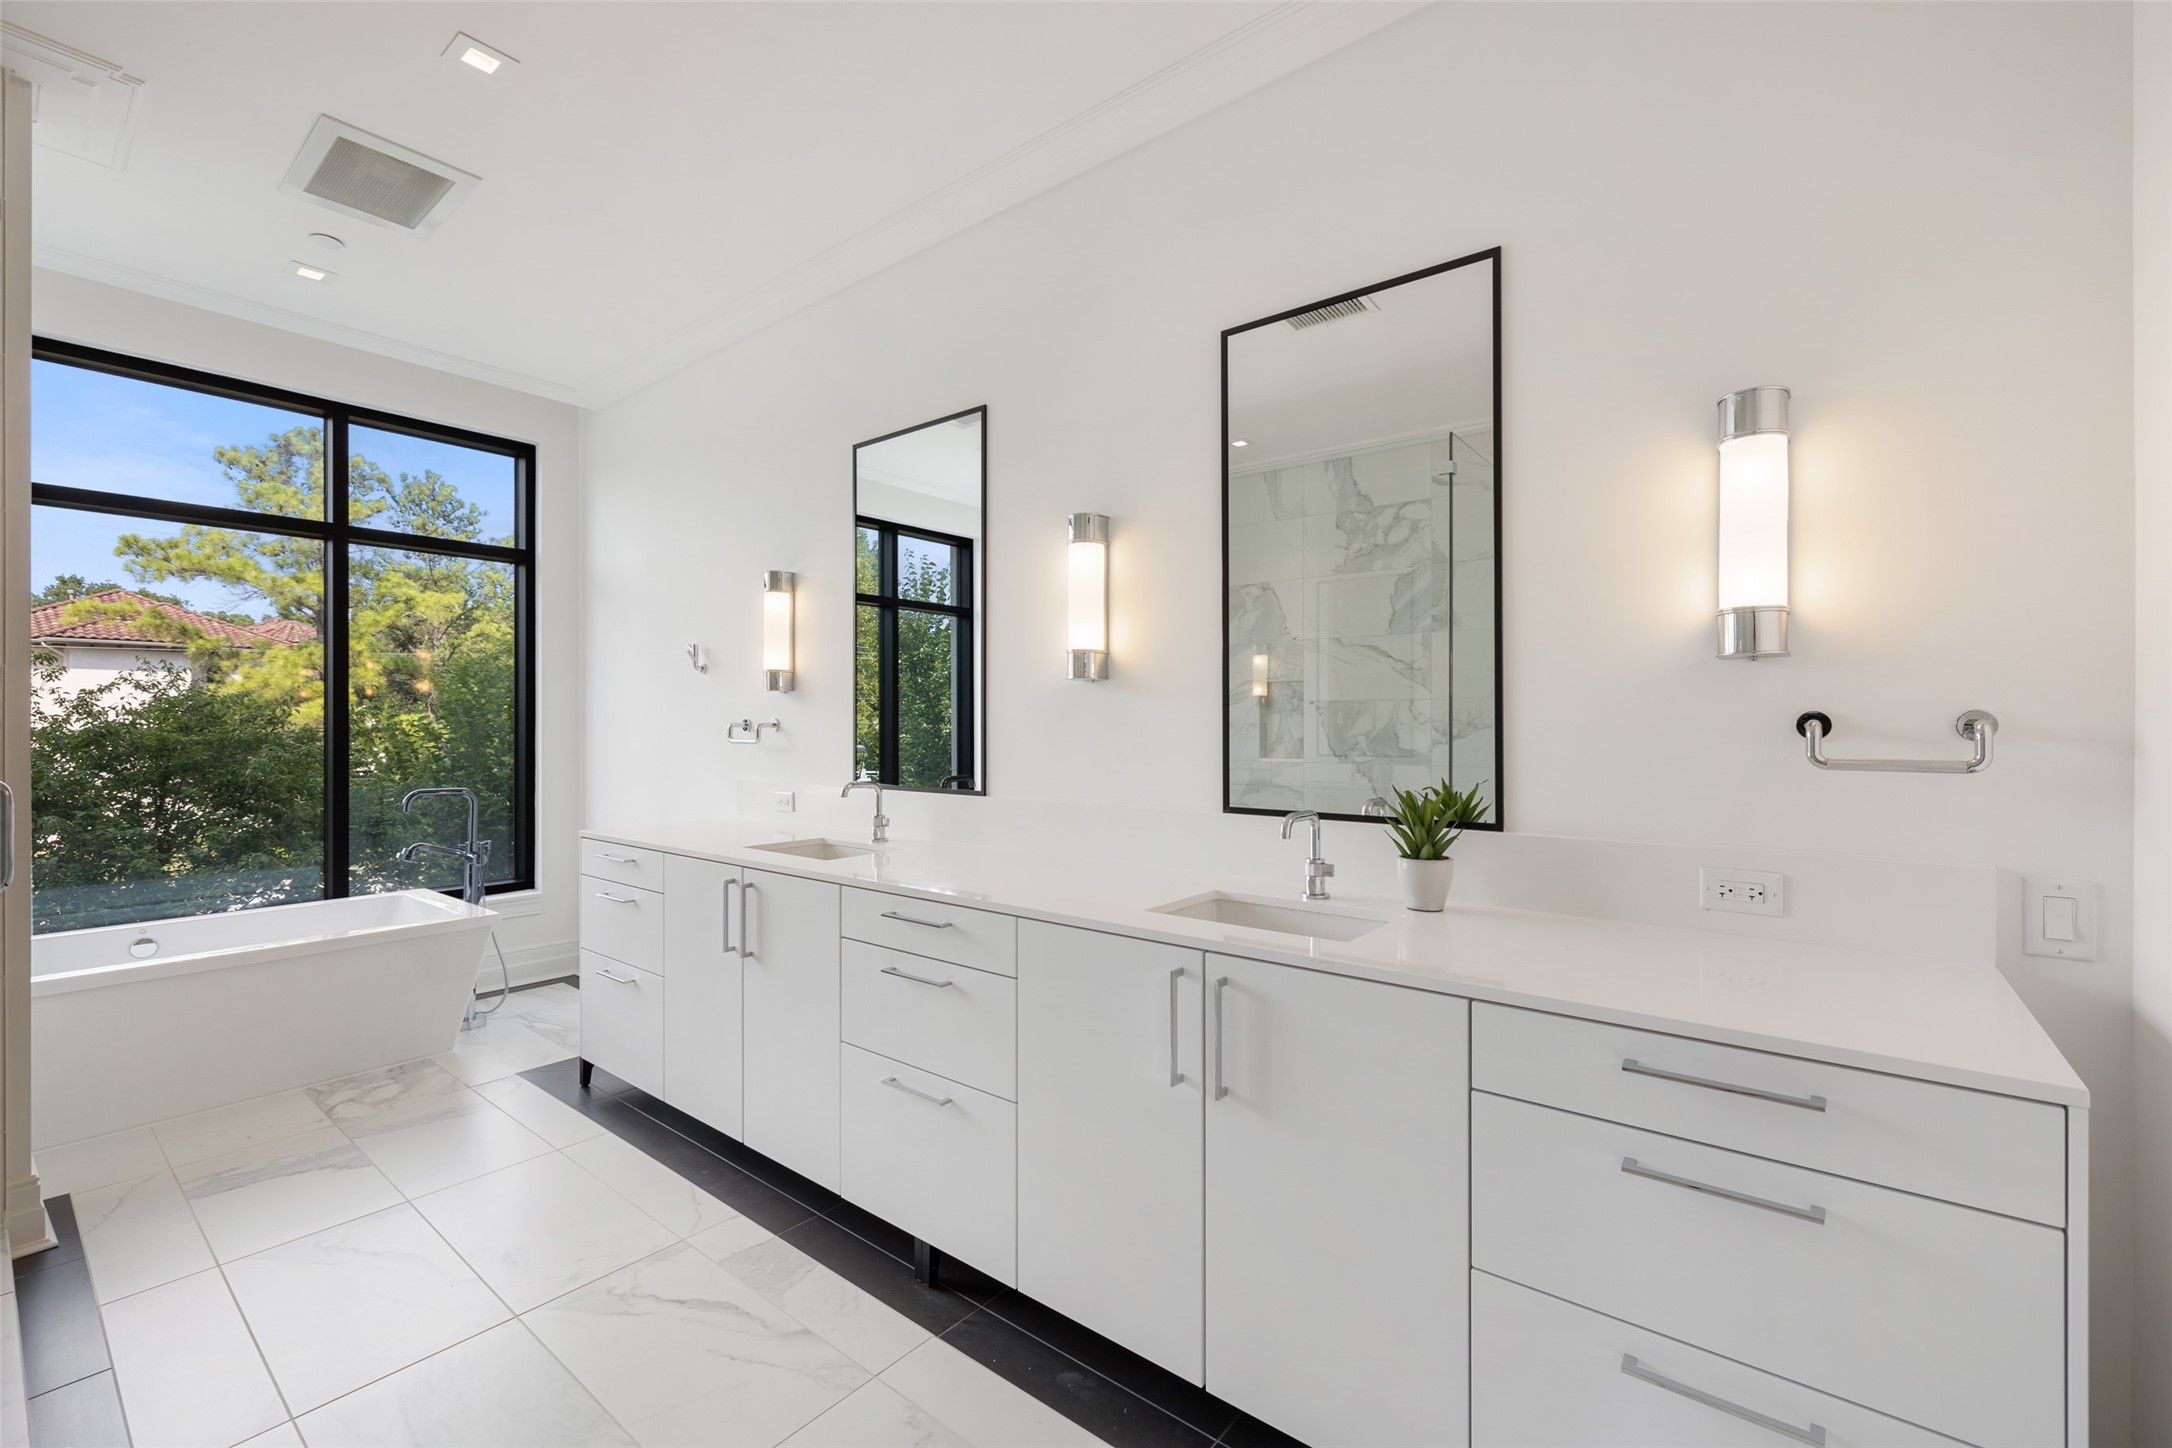 The Primary Bathroom with tree top views with a generous dual vanity, custom lighting and freestanding soaking tub.